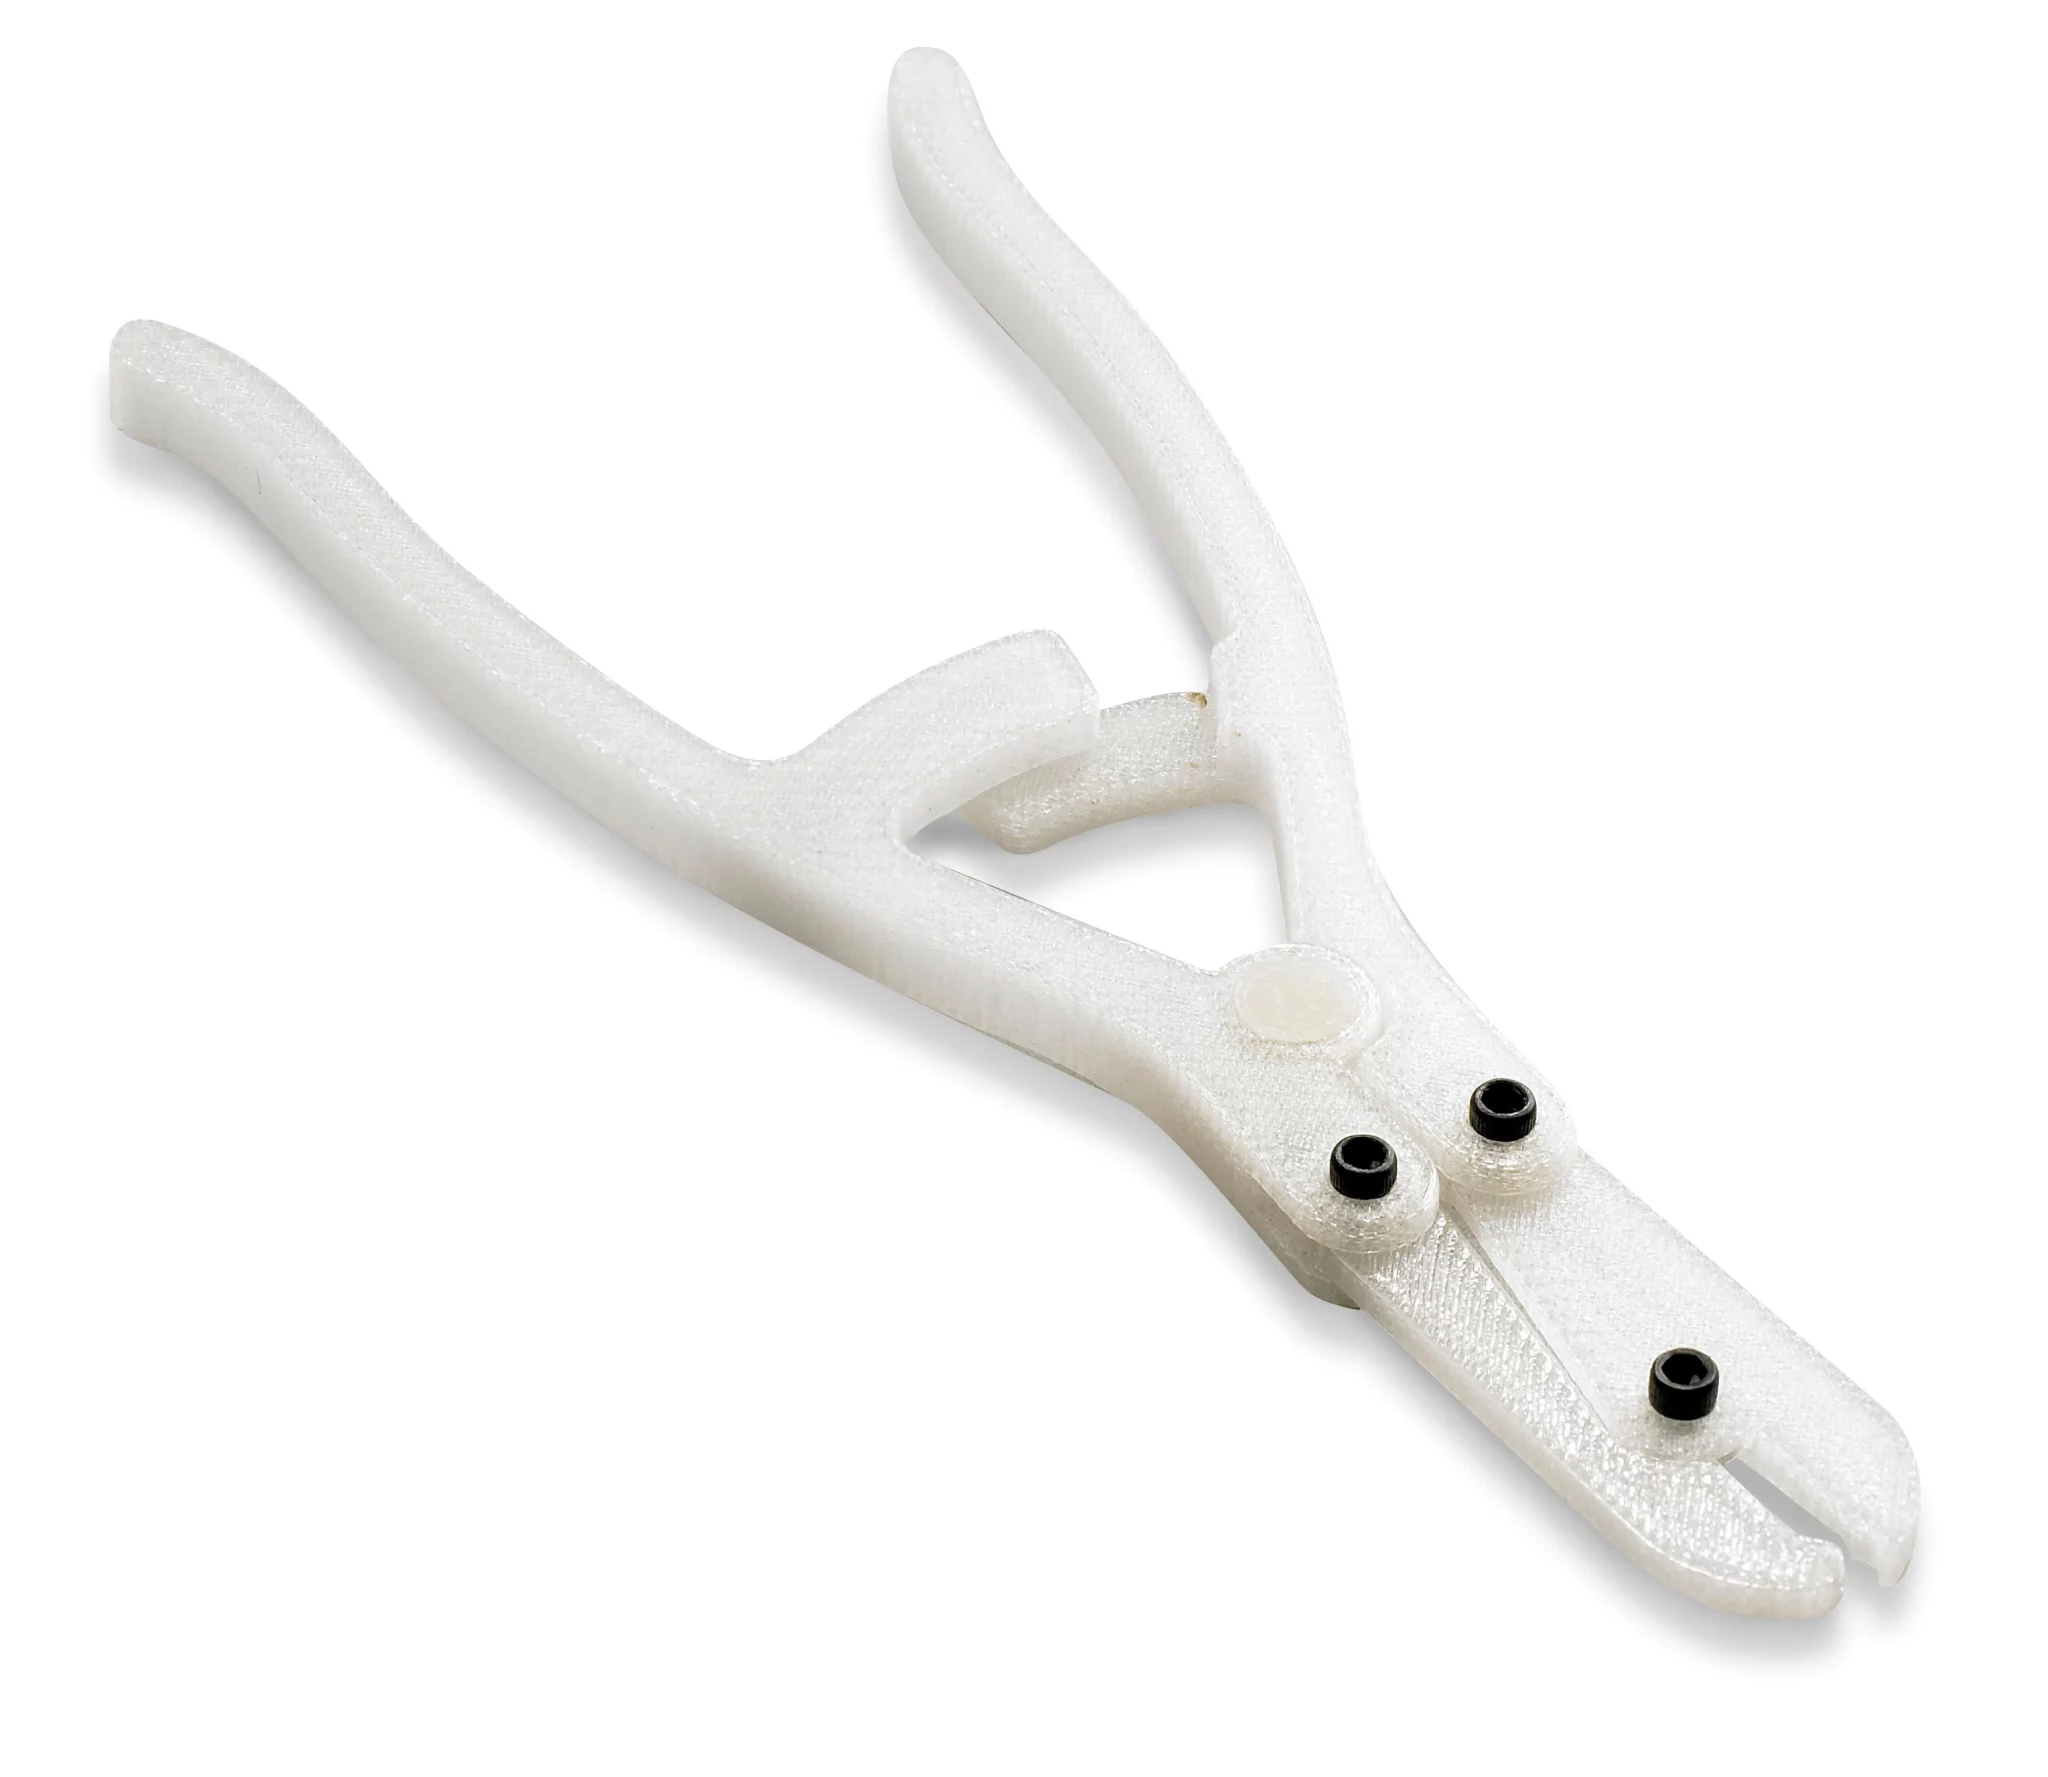 fdm_pc-iso-medical pliers